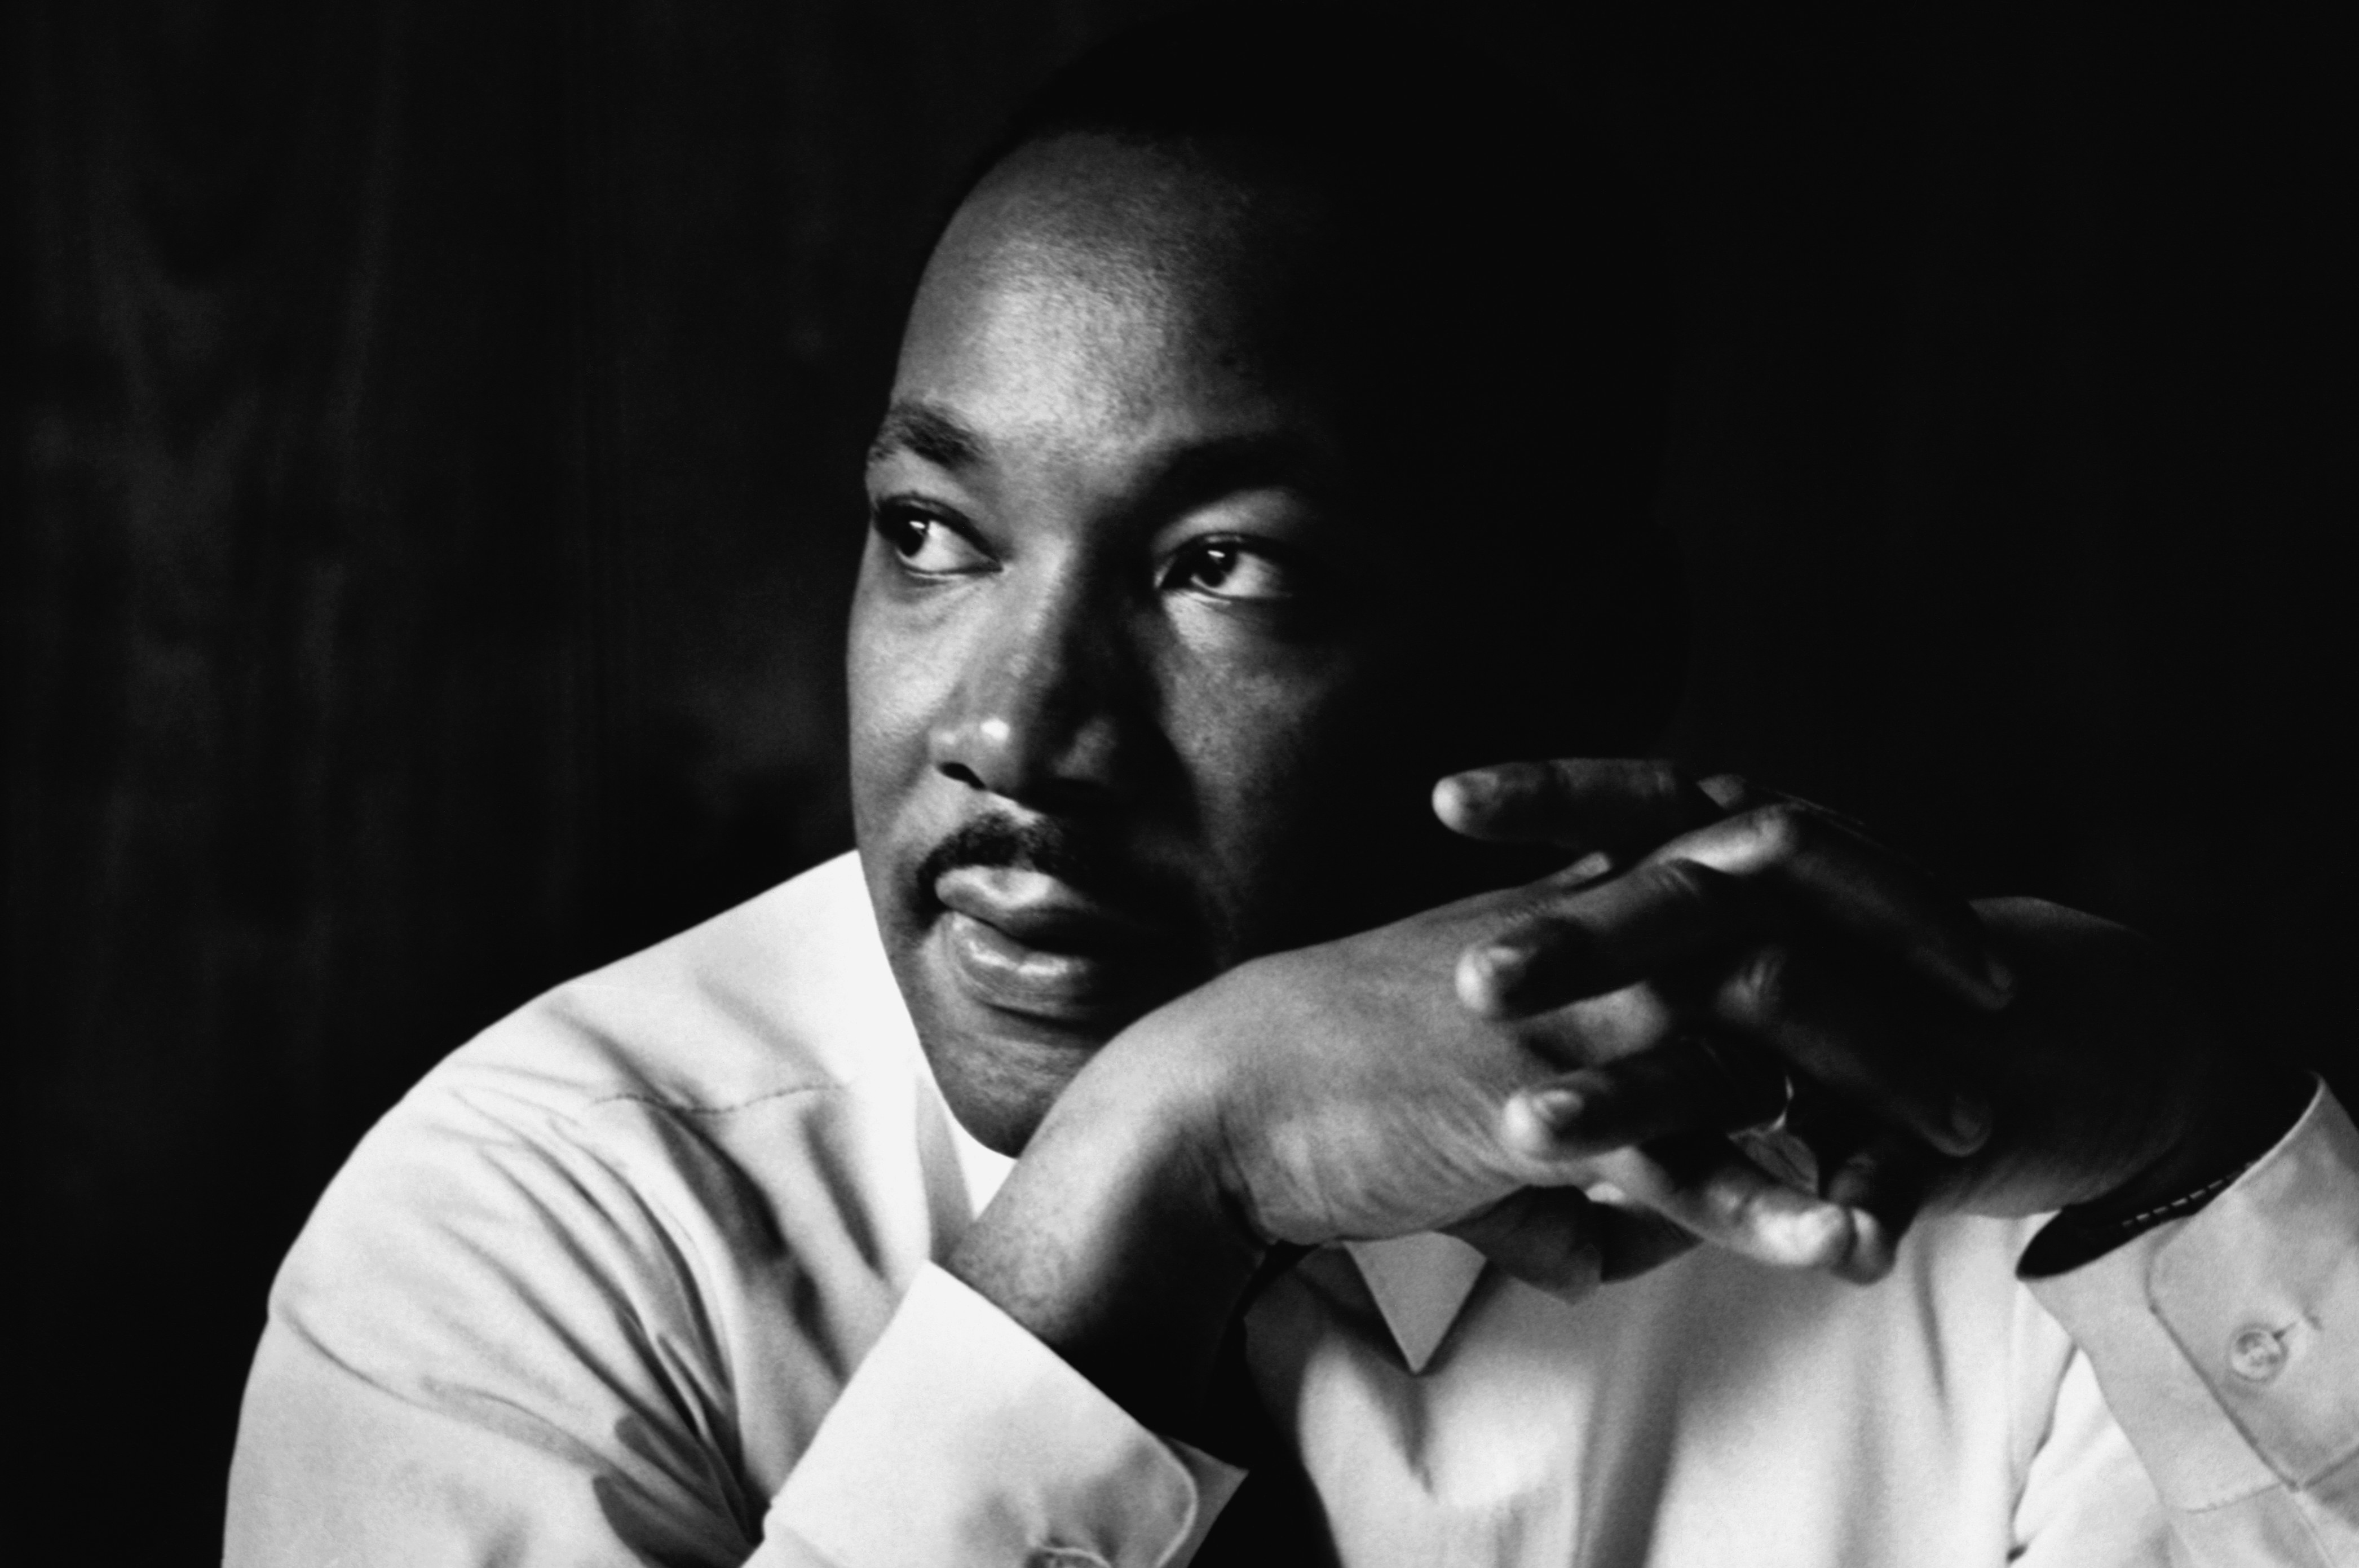 Martin Luther King holiday to be observed Monday, January 21 Announce